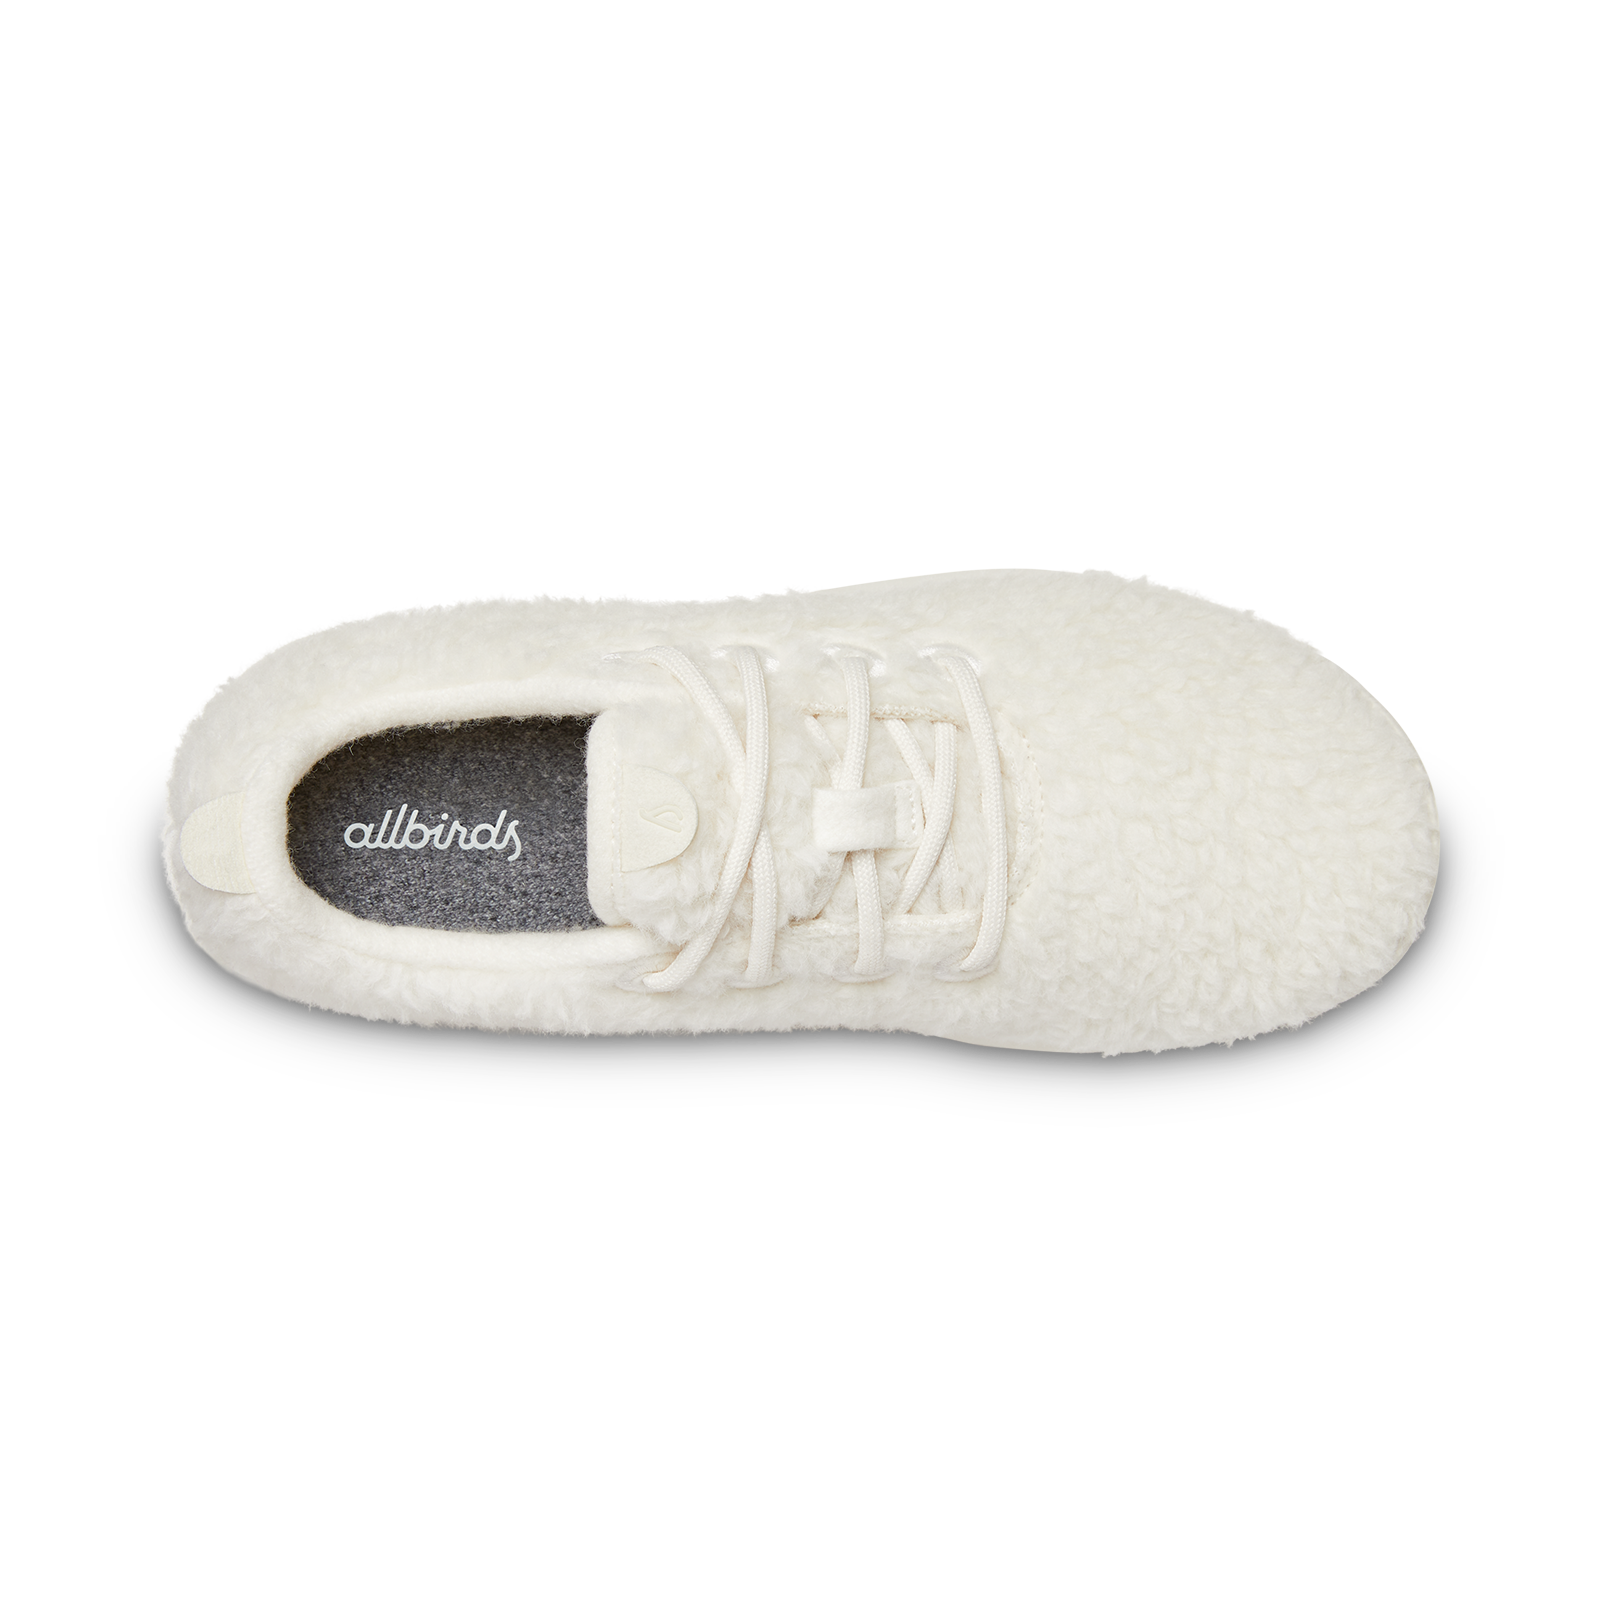 Smallbirds Wool Runners - Big Kids - Natural White Fluffs (Natural White Sole)